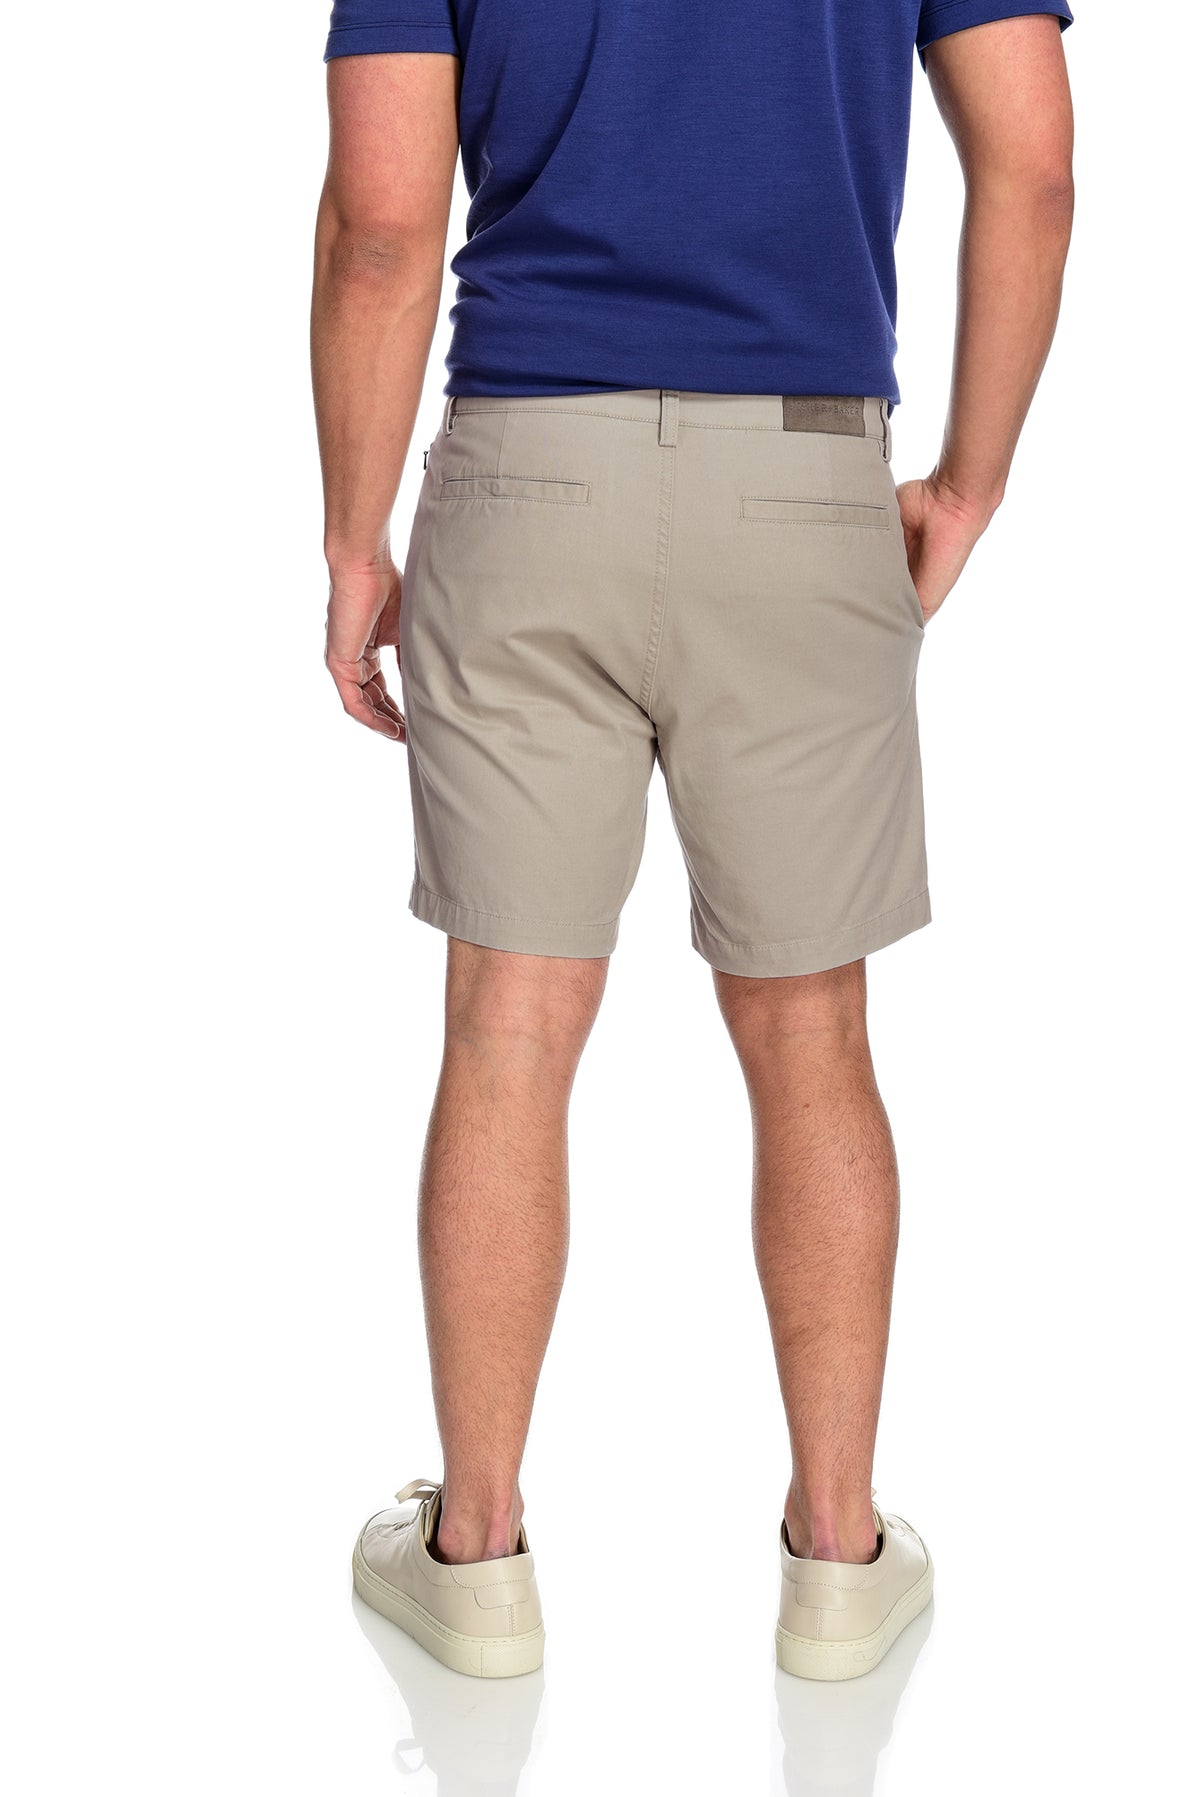 Men&#39;s 2-way stretching and breathable cotton blend Grayson Shorts in Khaki back welt pockets with snap closure detail